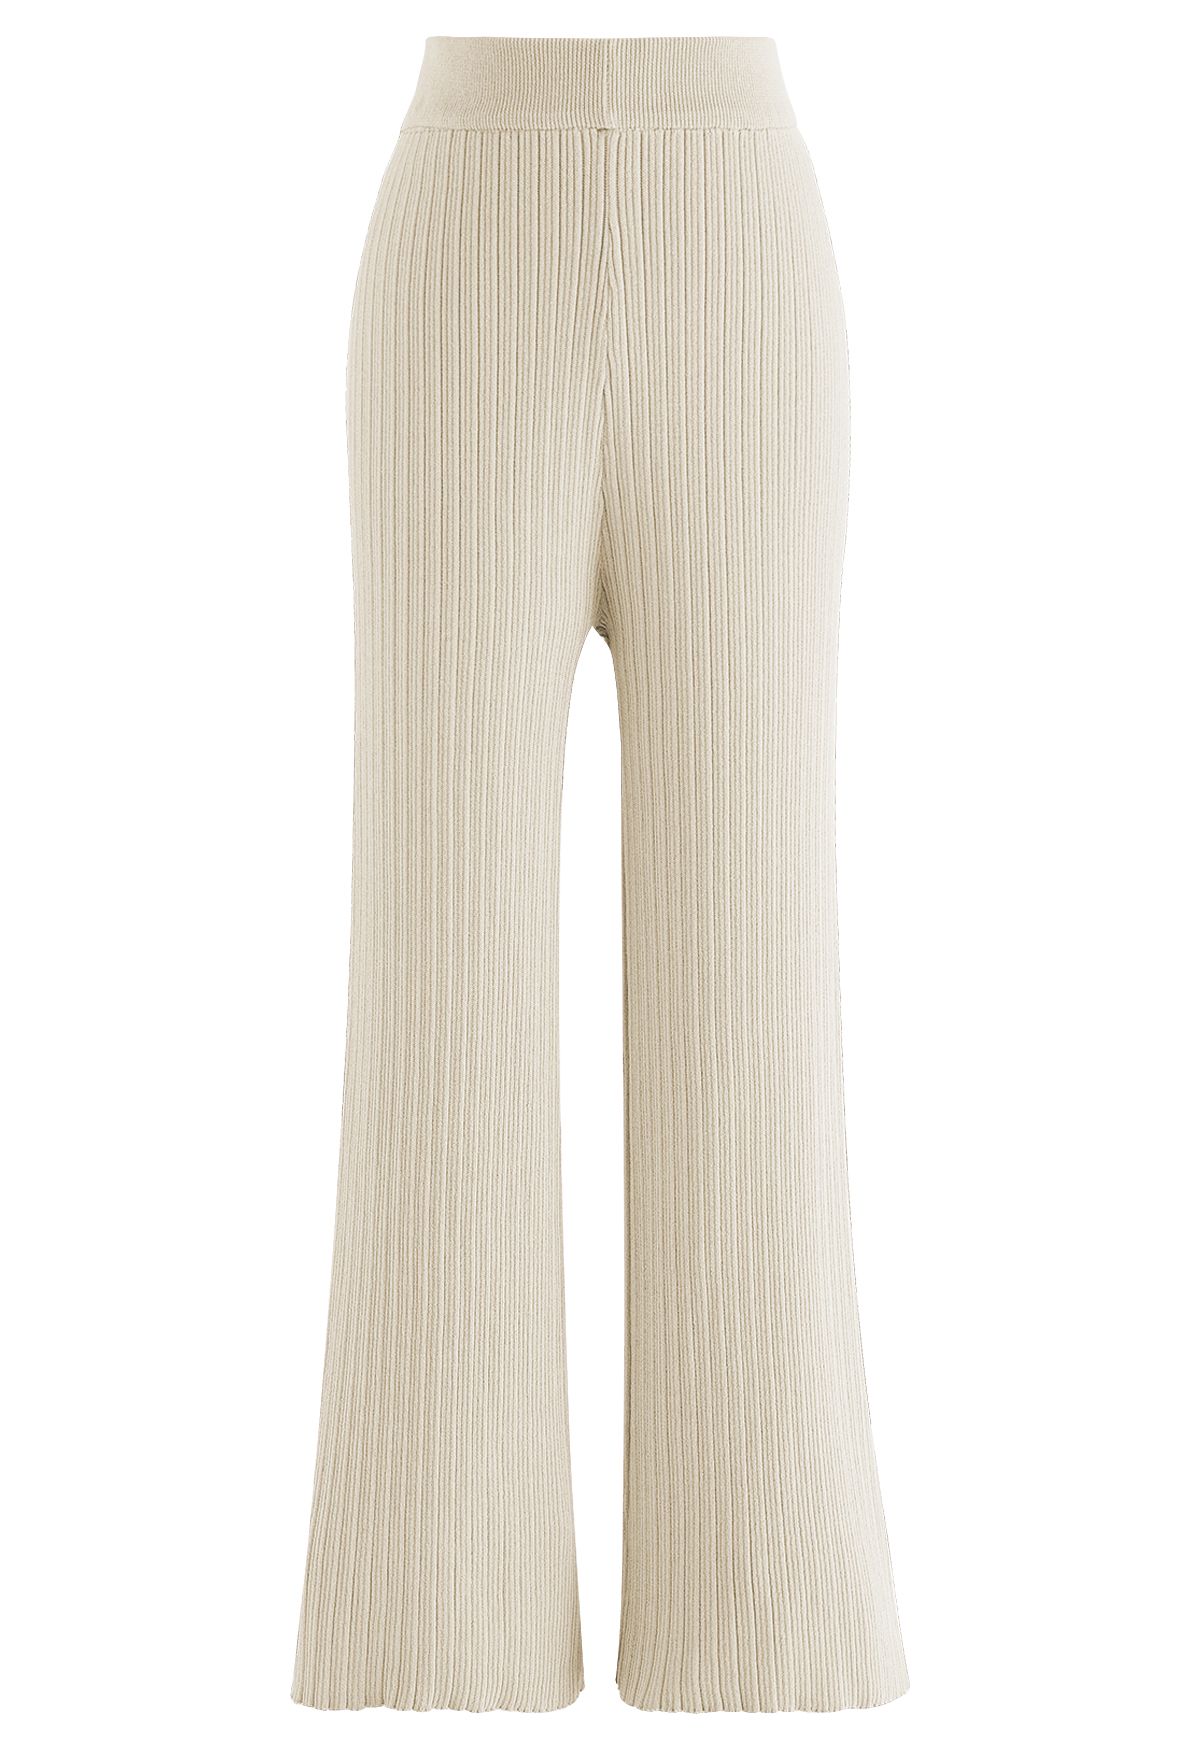 Drawstring Sleeve Knit Top and Pants Set in Cream